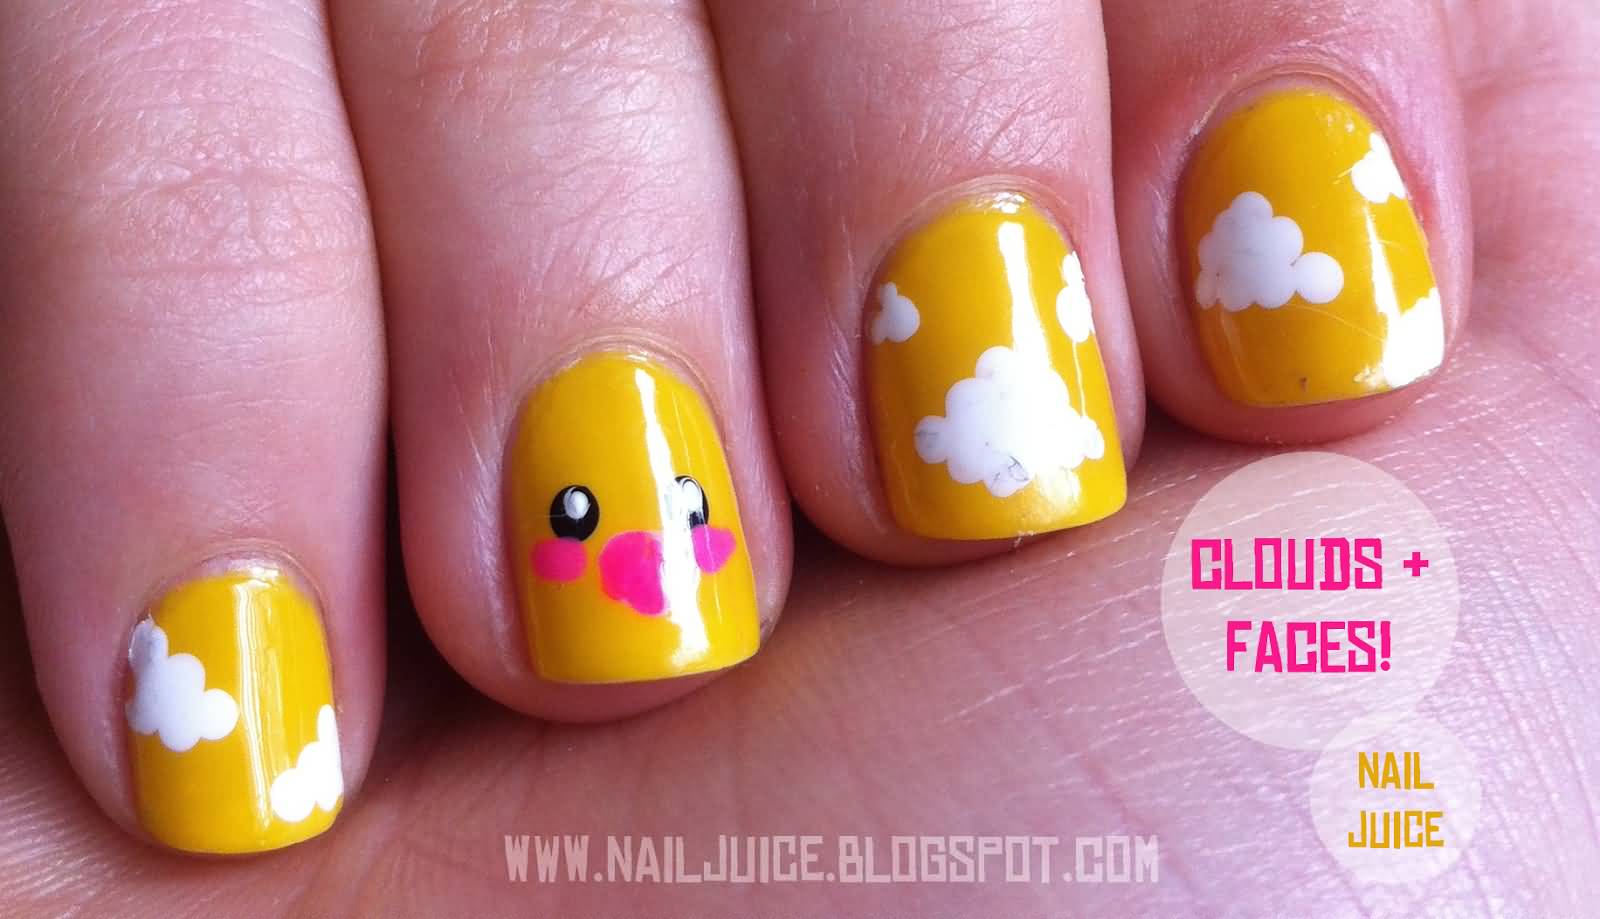 Yellow Nails With White Clouds Design Nail Art